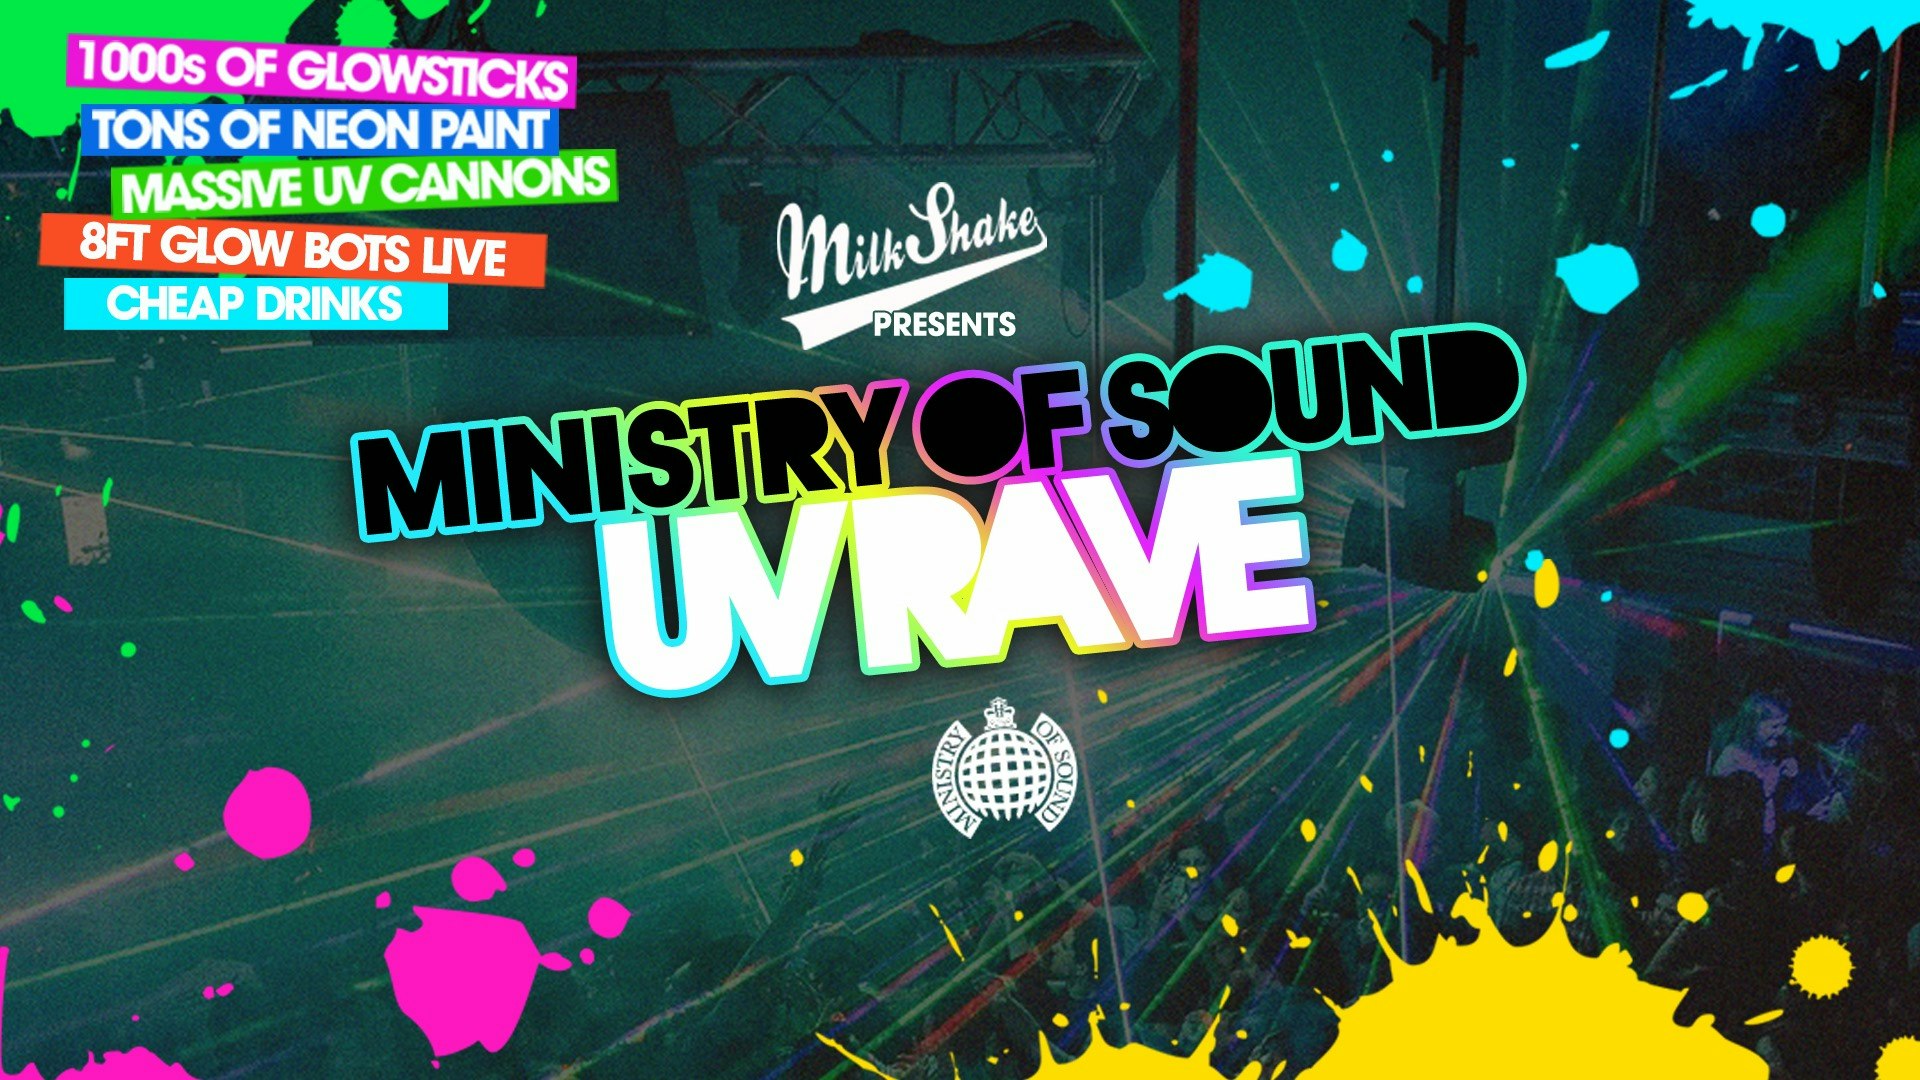 The Milkshake, Ministry of Sound SUMMER UV Rave (Part 2) ⚡ NEARLY SOLD OUT